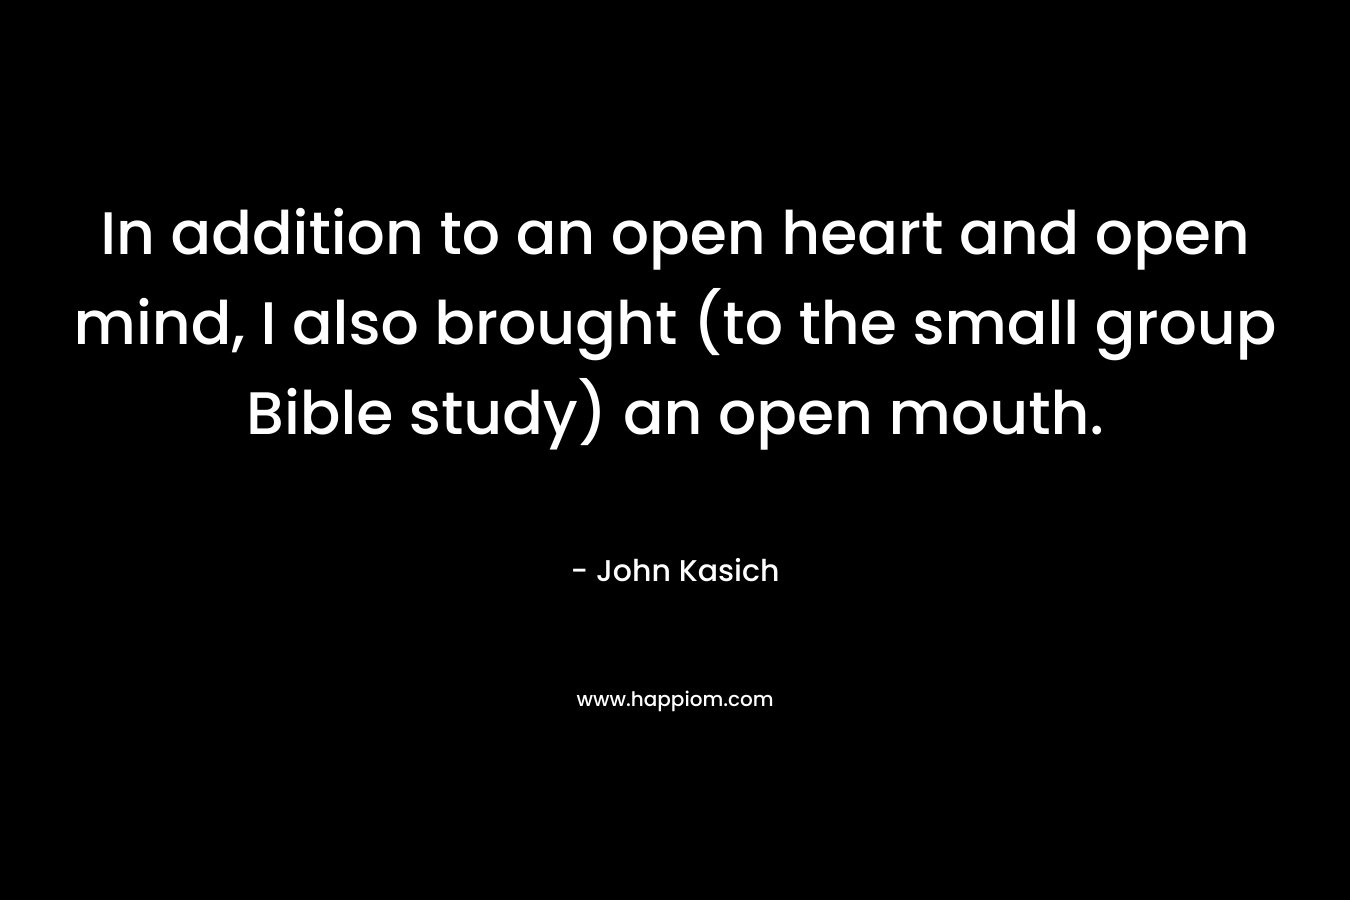 In addition to an open heart and open mind, I also brought (to the small group Bible study) an open mouth.